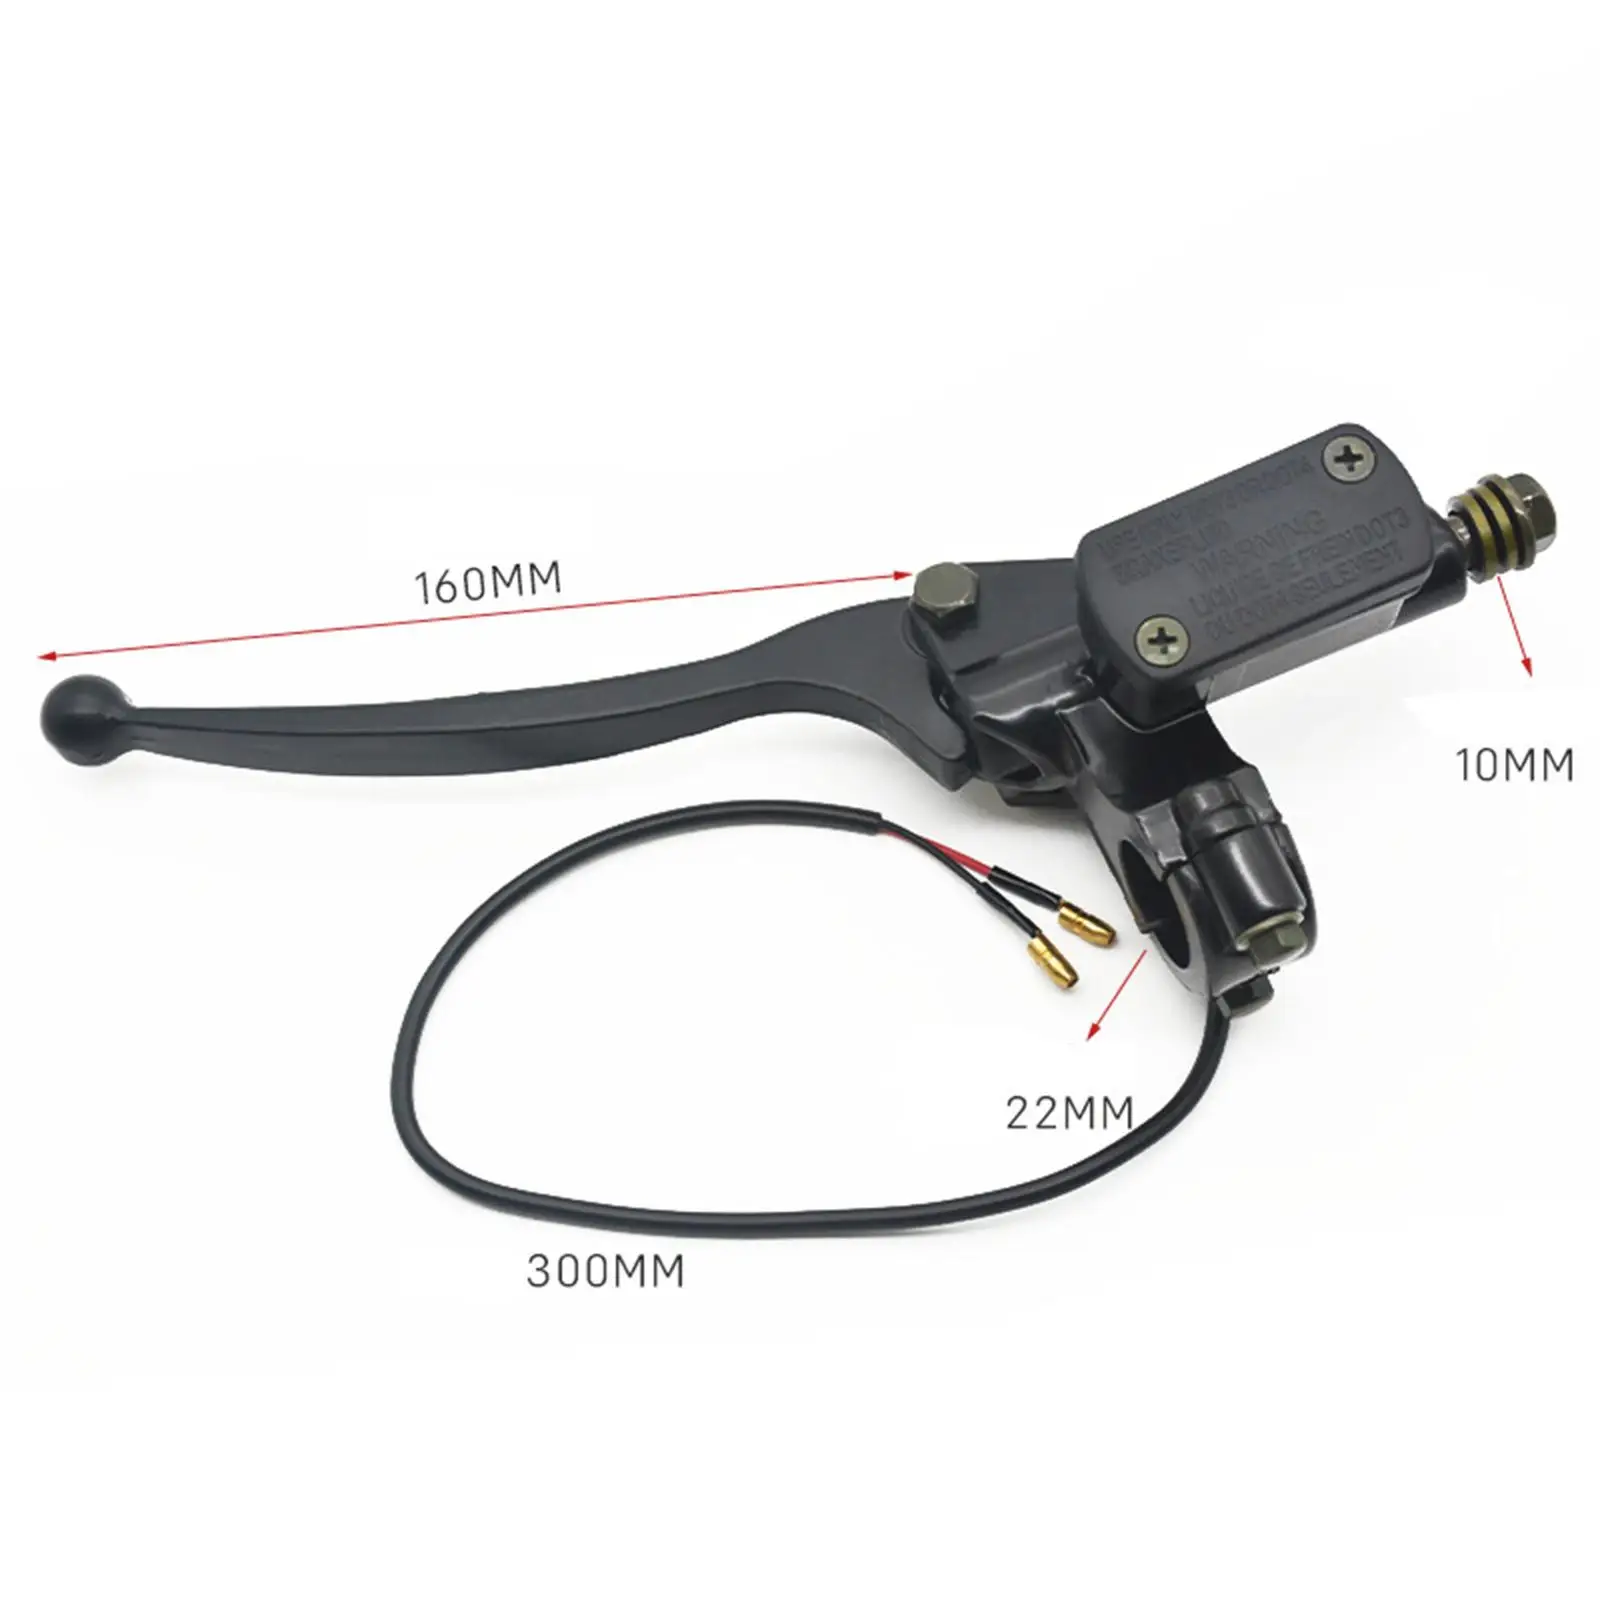 Front Brake Pump Replaces Aluminum Alloy Professional with Reservoir Quality